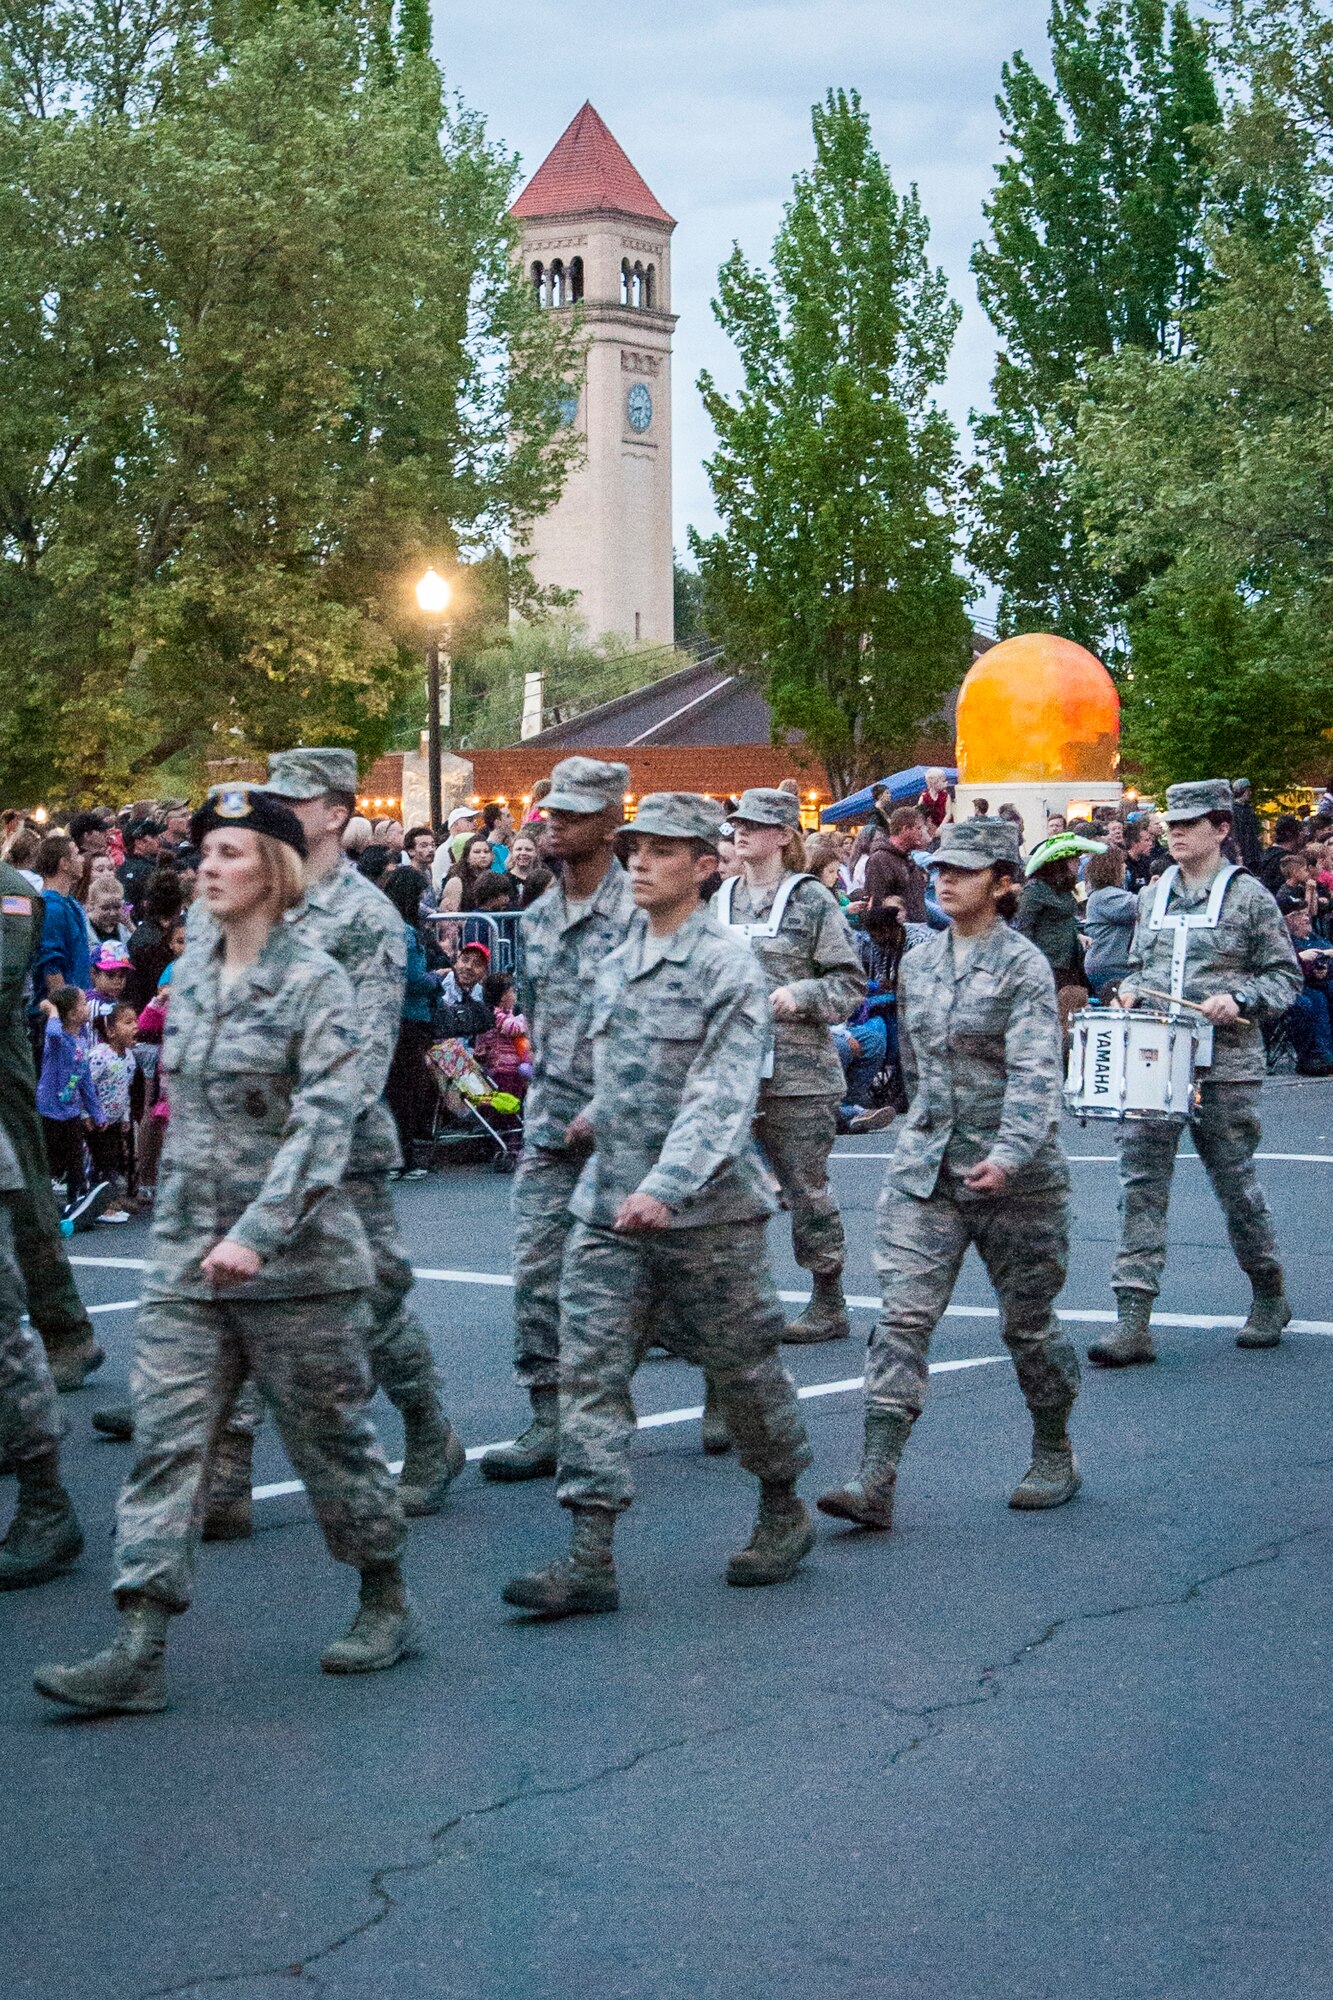 Airmen from Fairchild Air Force Base, Wash., march in formation during the 75th Annual Lilac Festival Armed Forced Torchlight Parade in Spokane, Wash., May 17, 2014. The parade is the largest armed forces torchlight parade in the nation and is made to honor service members of both the past and present. (U.S. Air Force photo by Staff Sgt. Benjamin W. Stratton/Released)